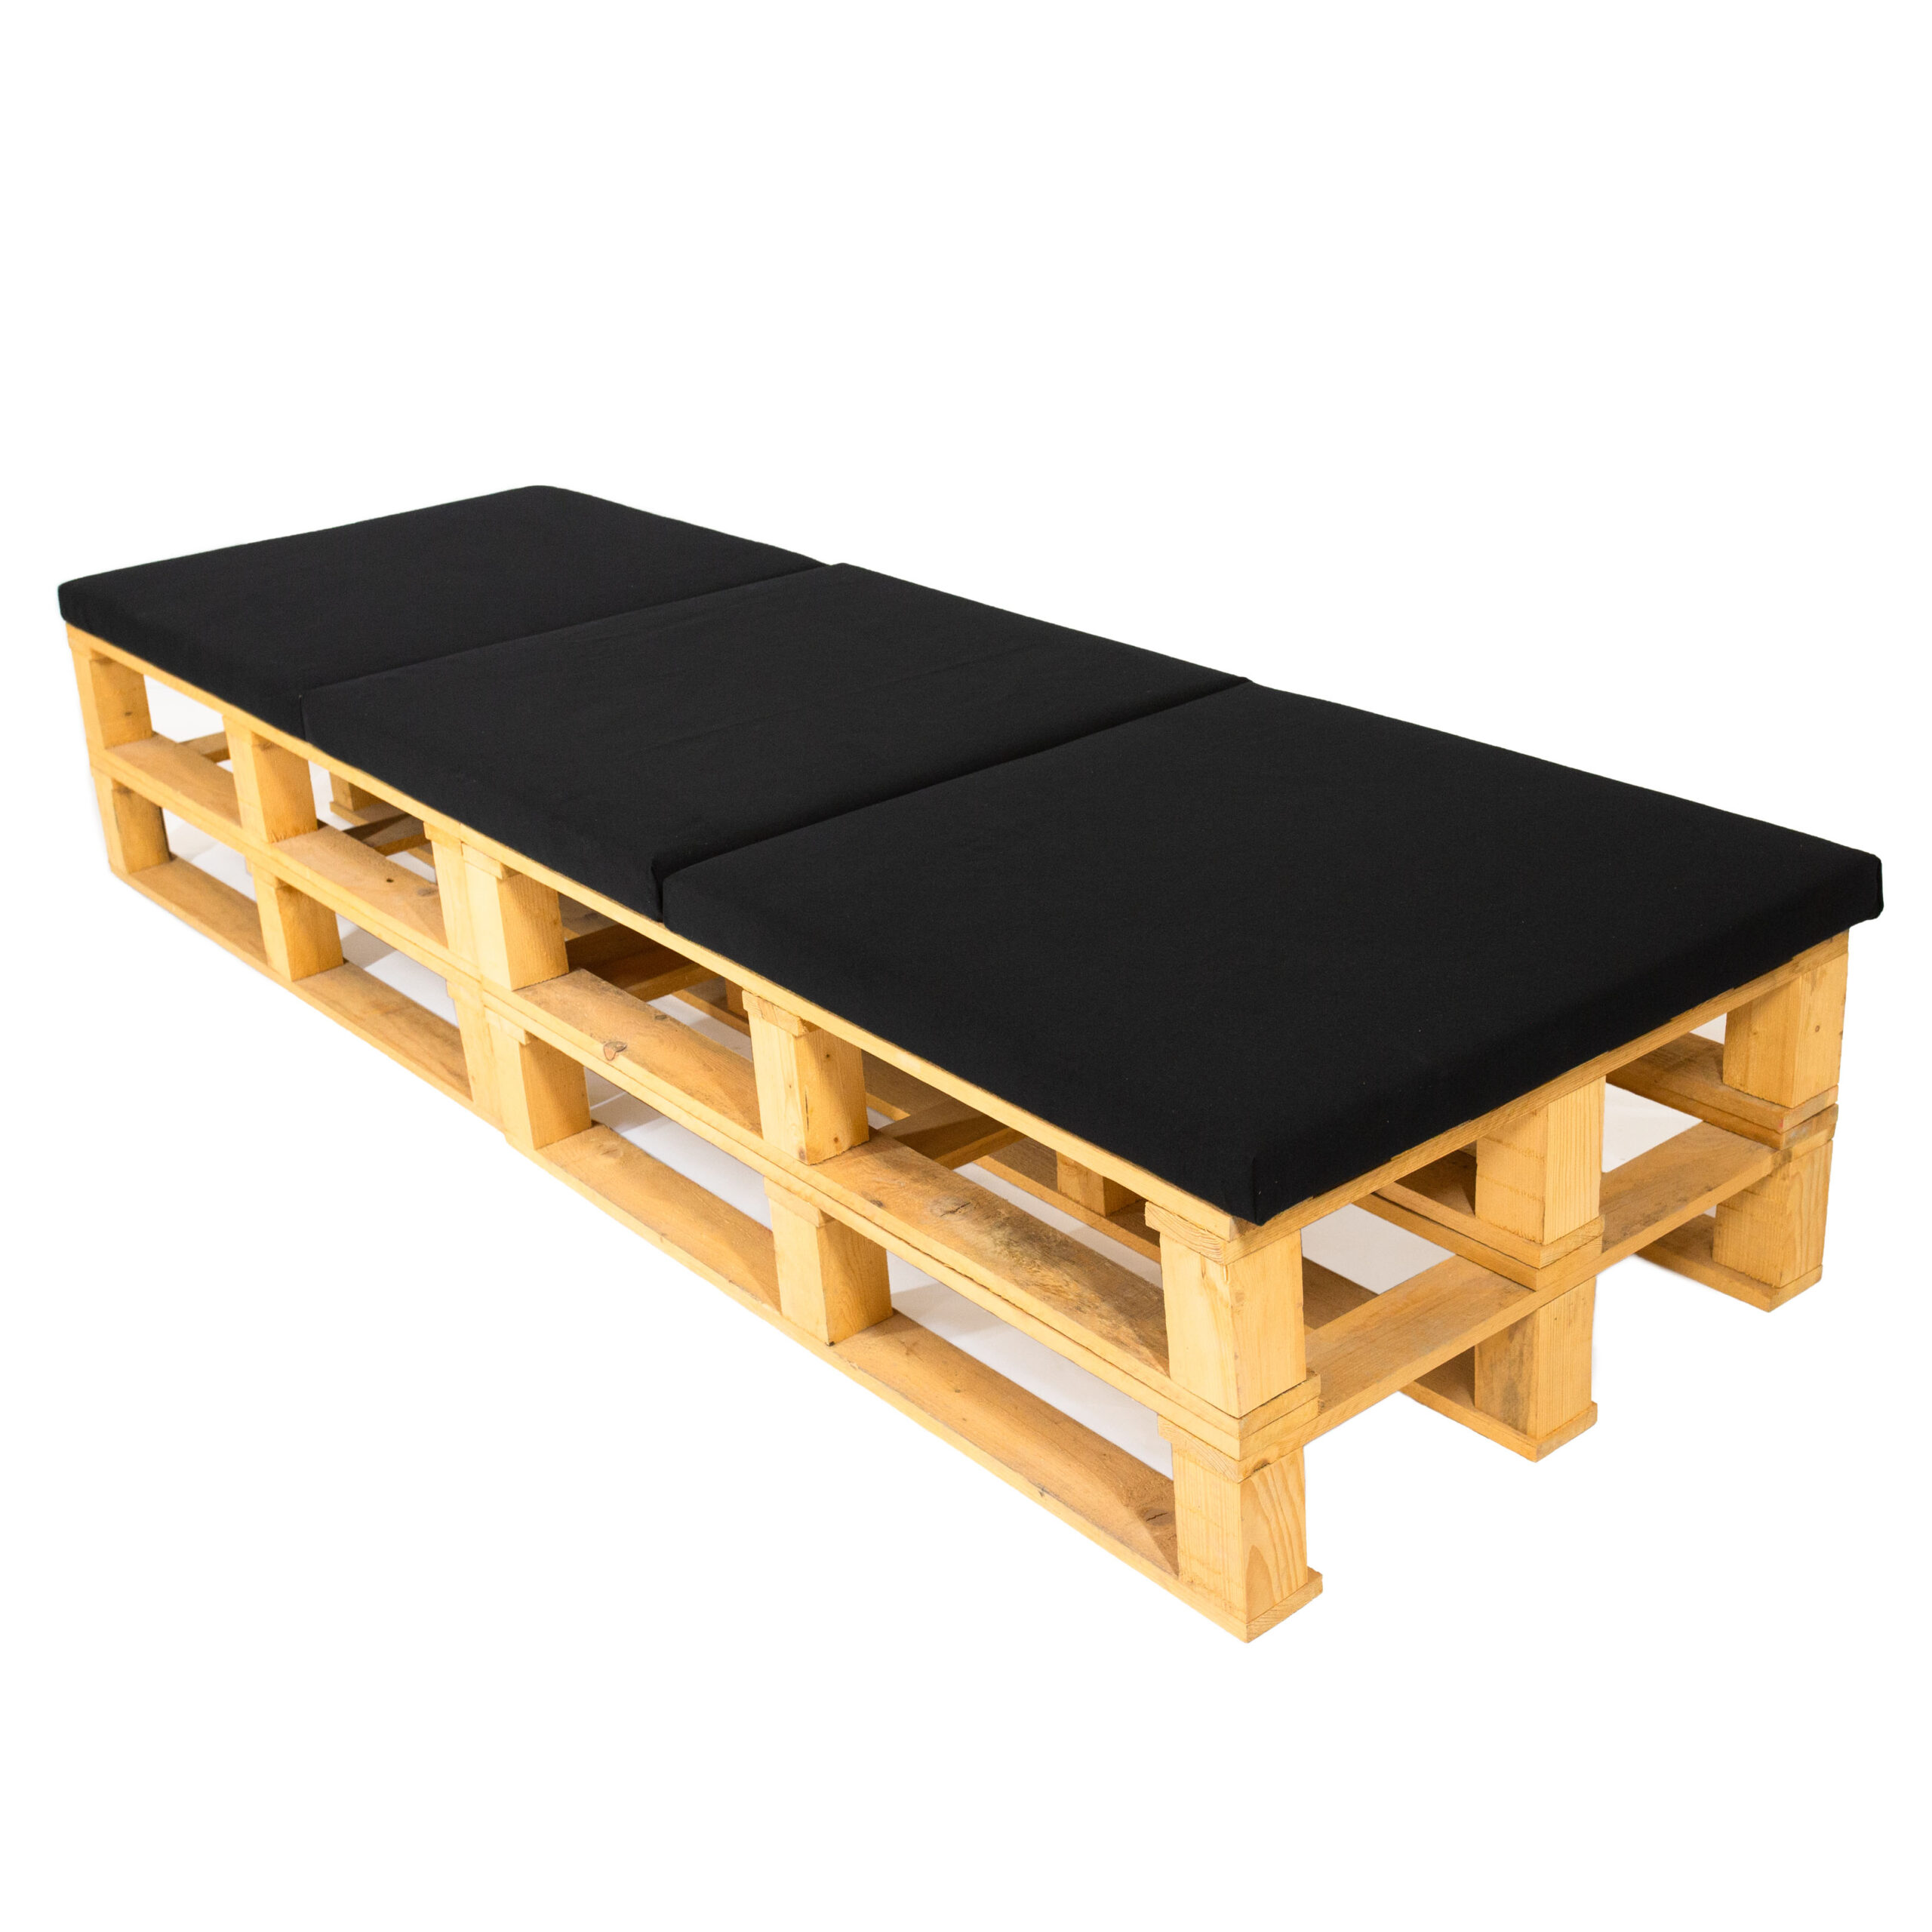 PALLET 3 SEATER